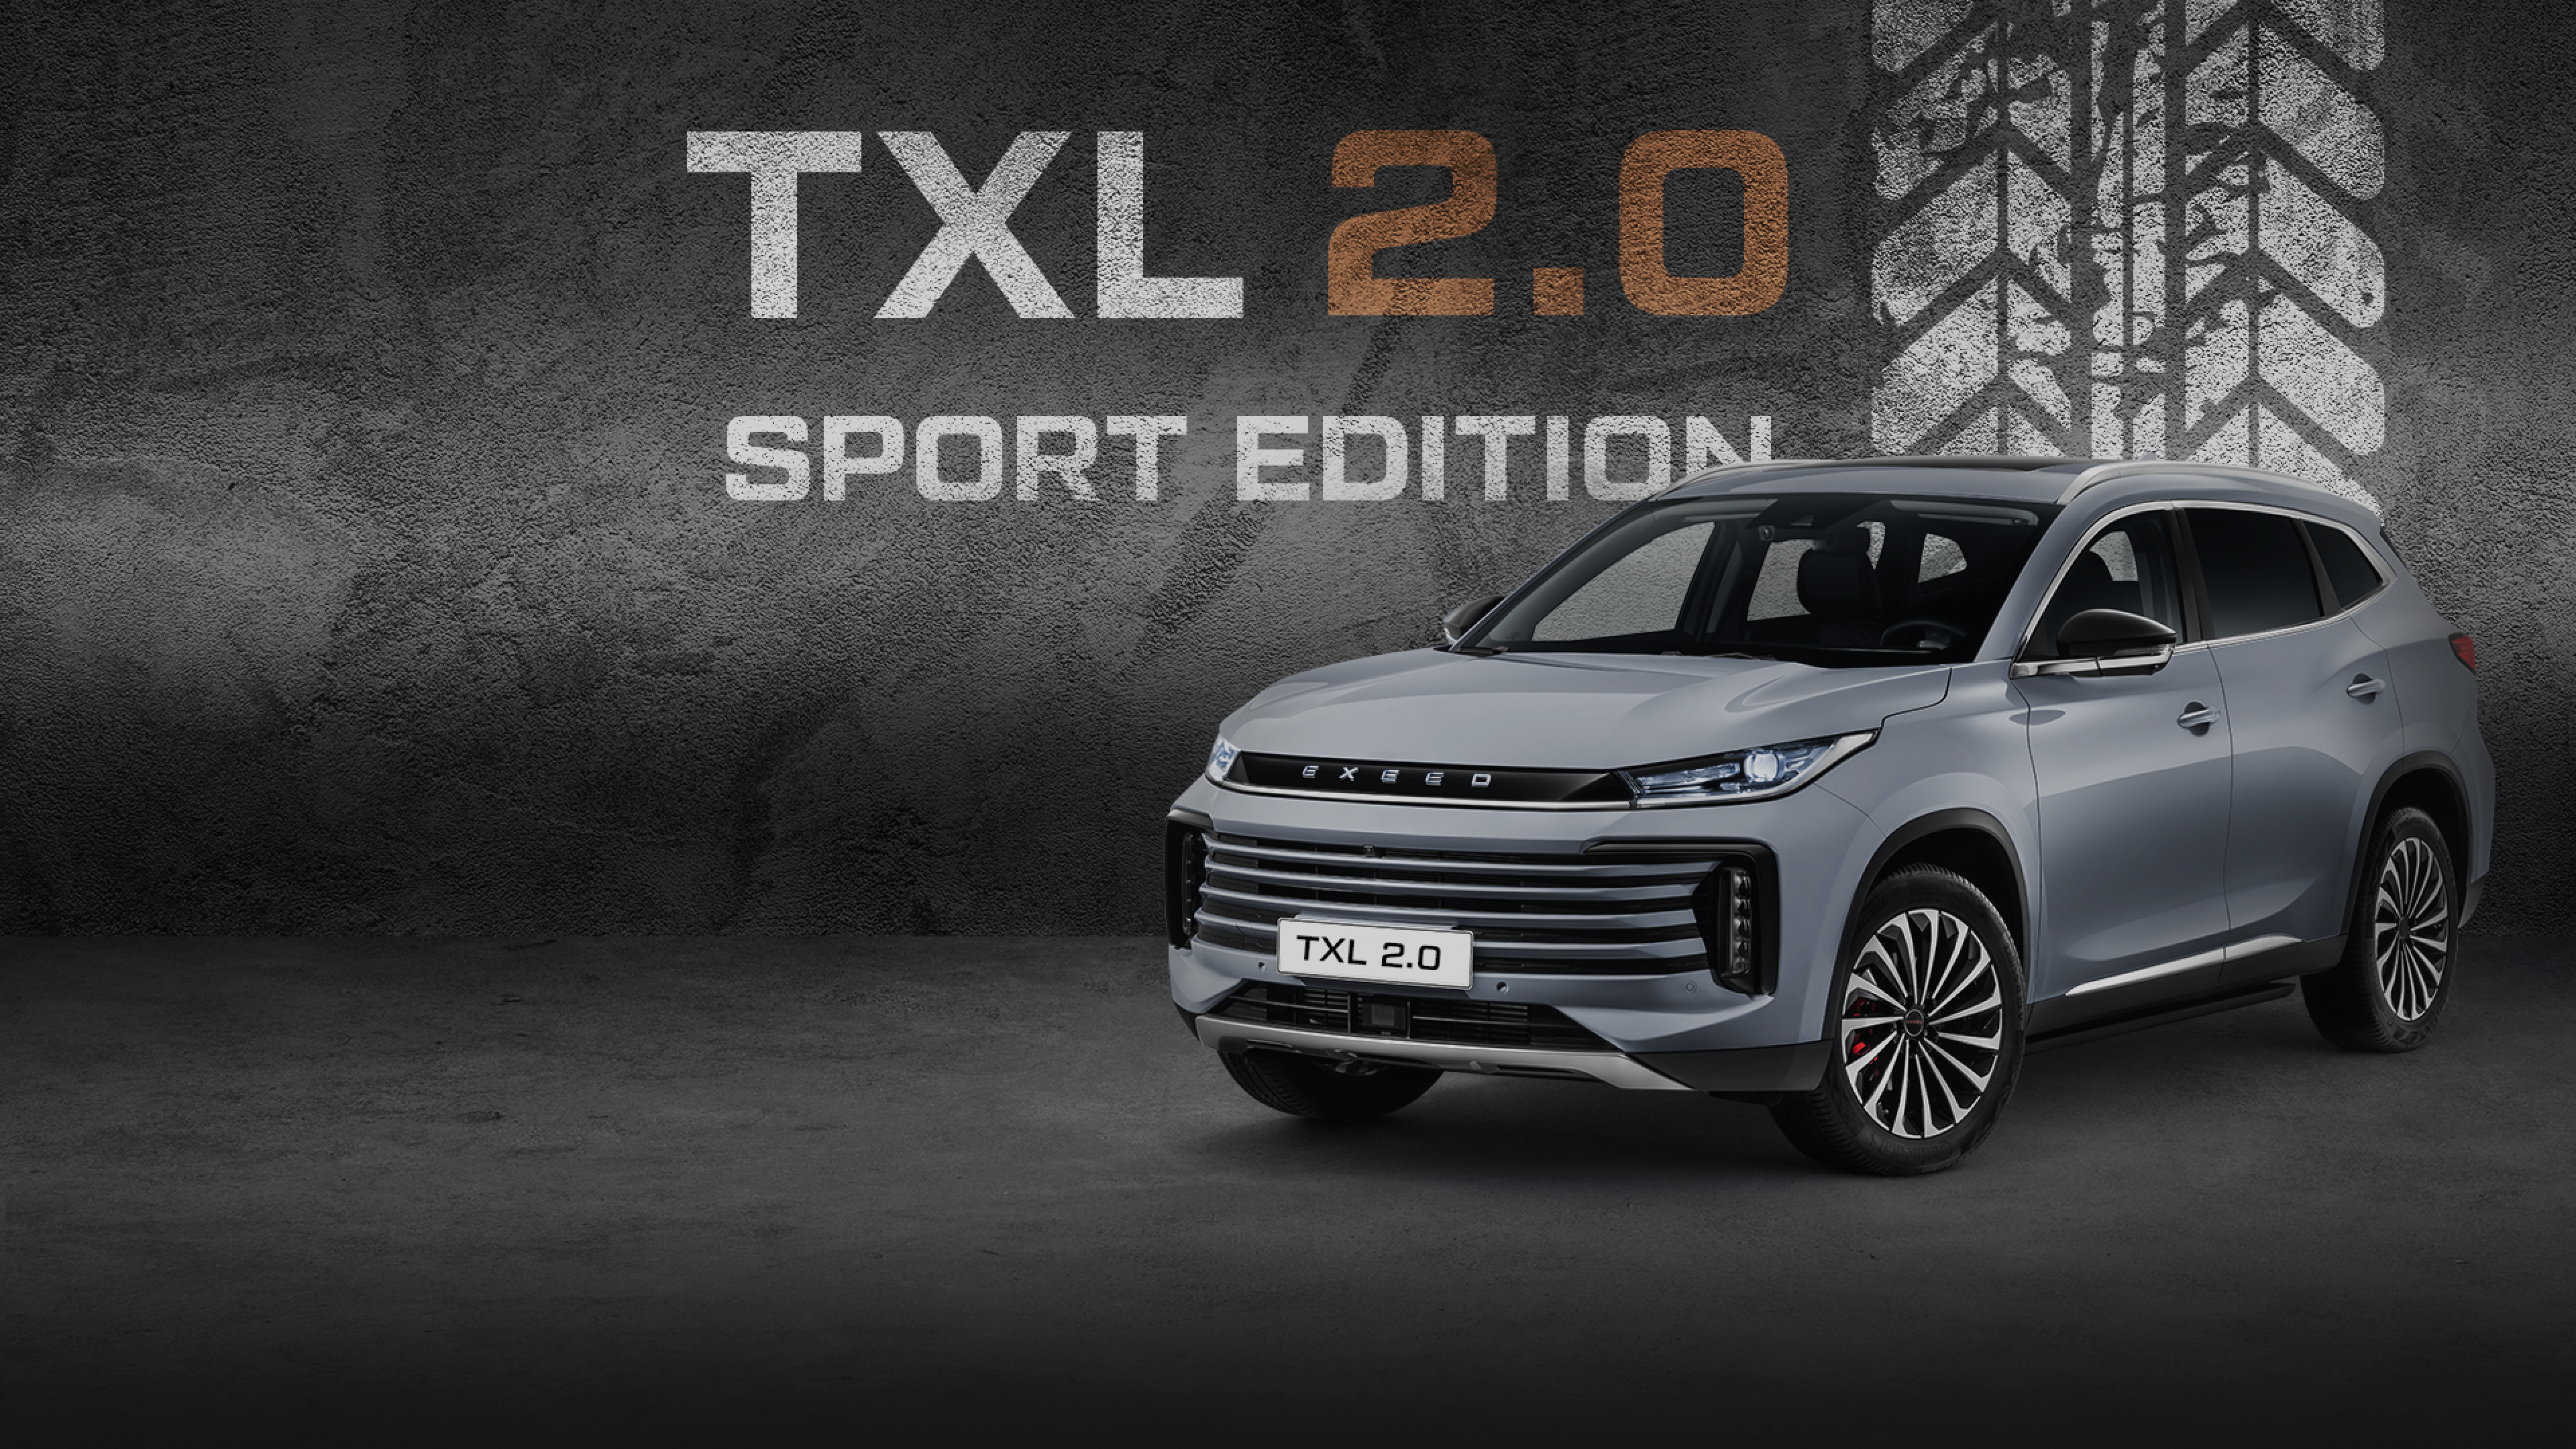 Exceed 2.0 sport edition. Exeed TXL 2. Эксид кроссовер. Exceed TXL 2.0. Exeed TXL 2.0 Sport.